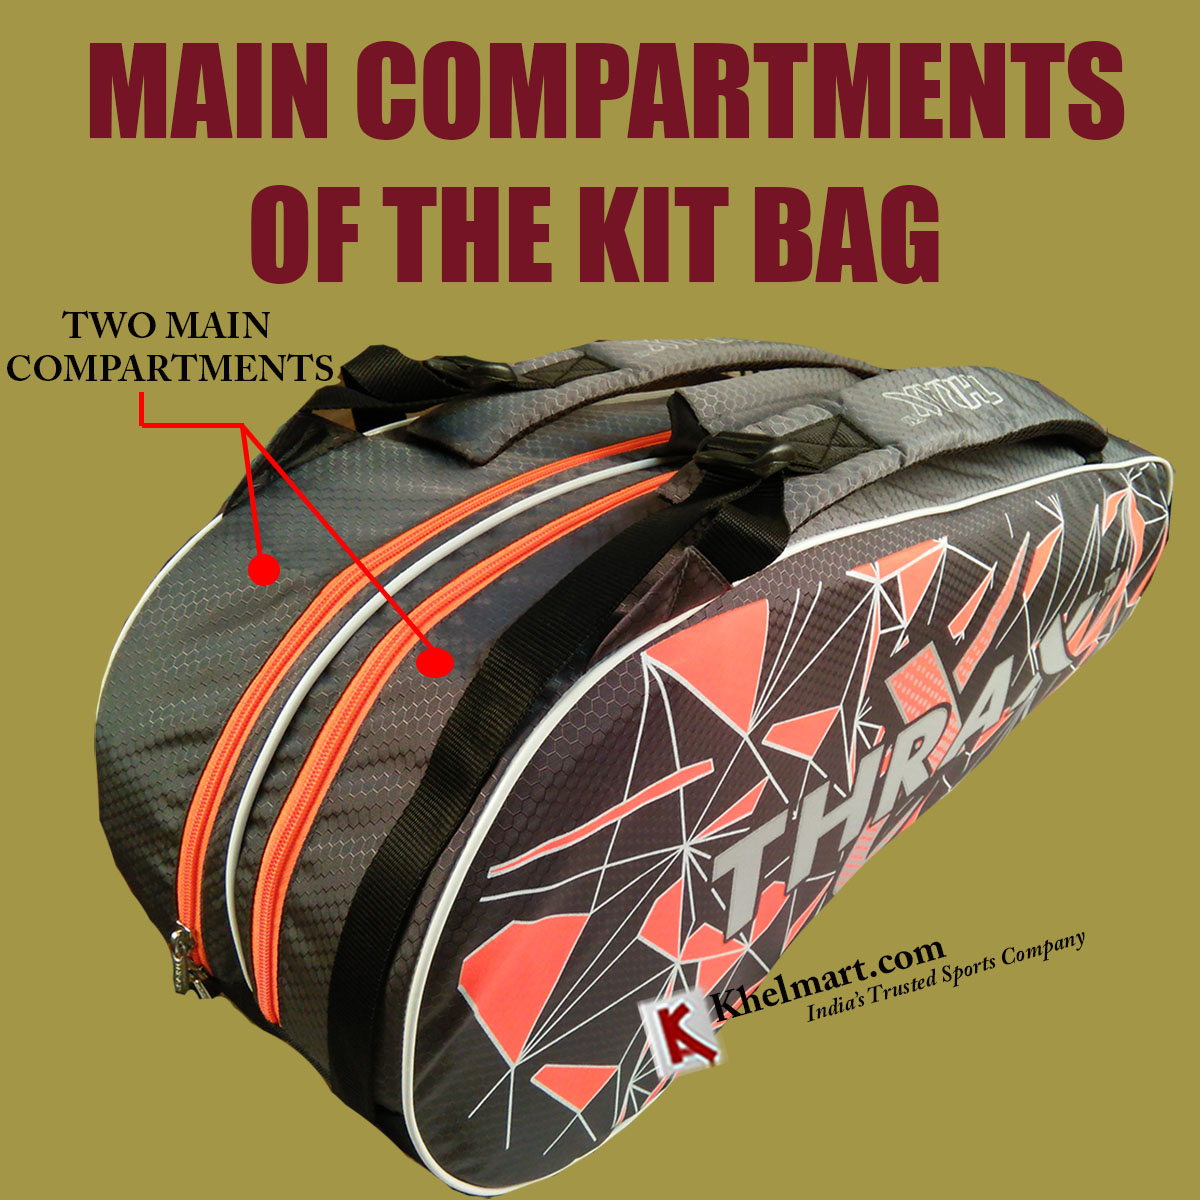 MAIN_COMPARTMENTS_OF_THE_KIT_BAG.jpg